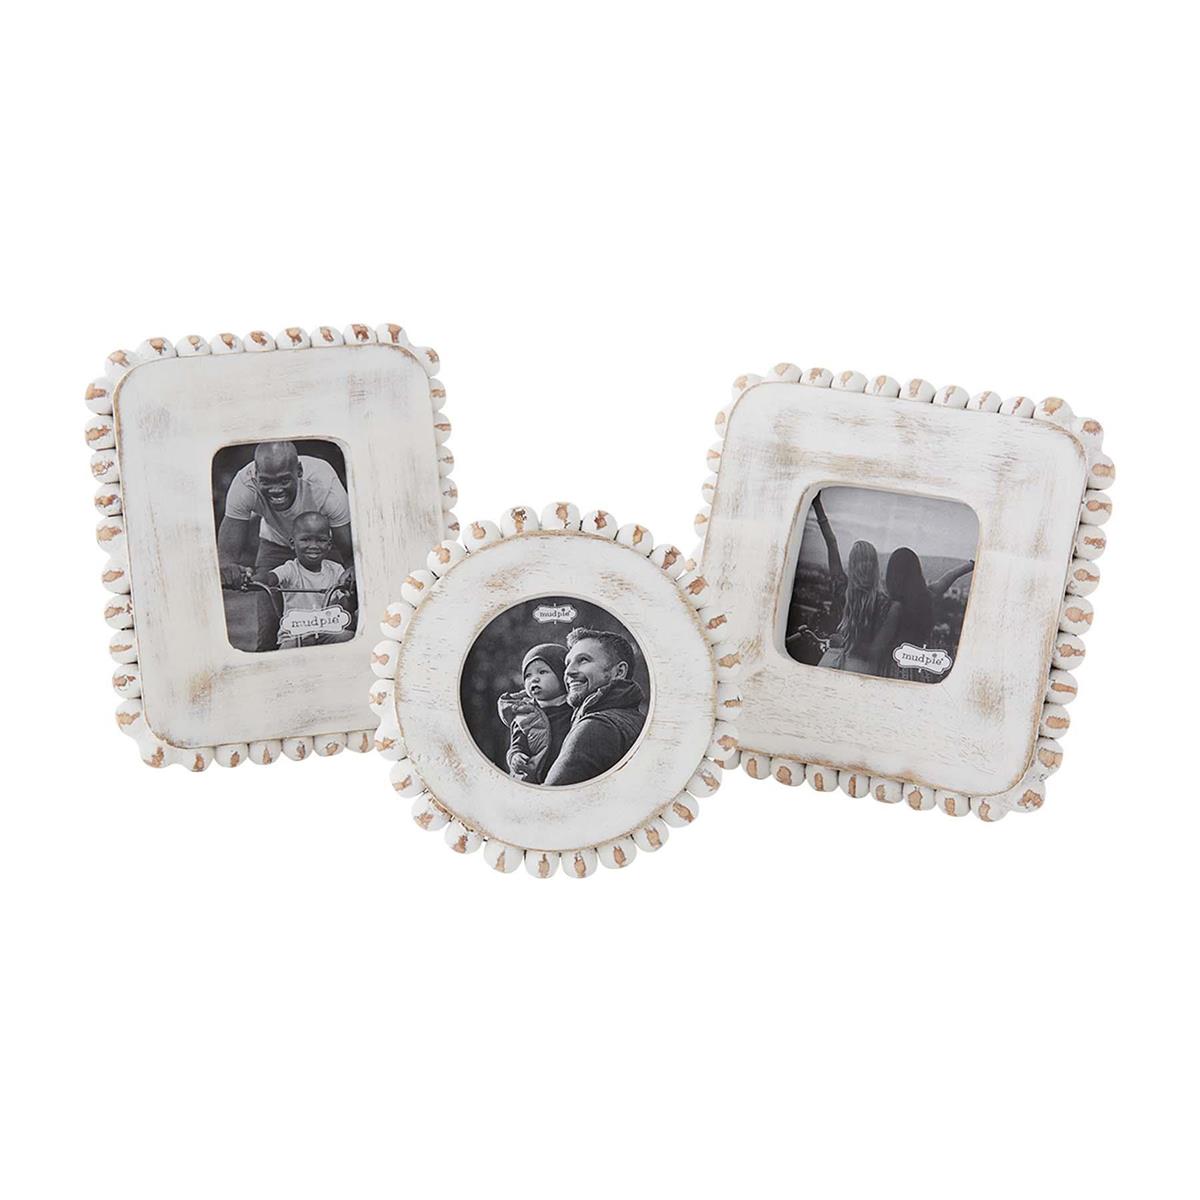 Antique White Wood Beaded Picture Frame, 4x6